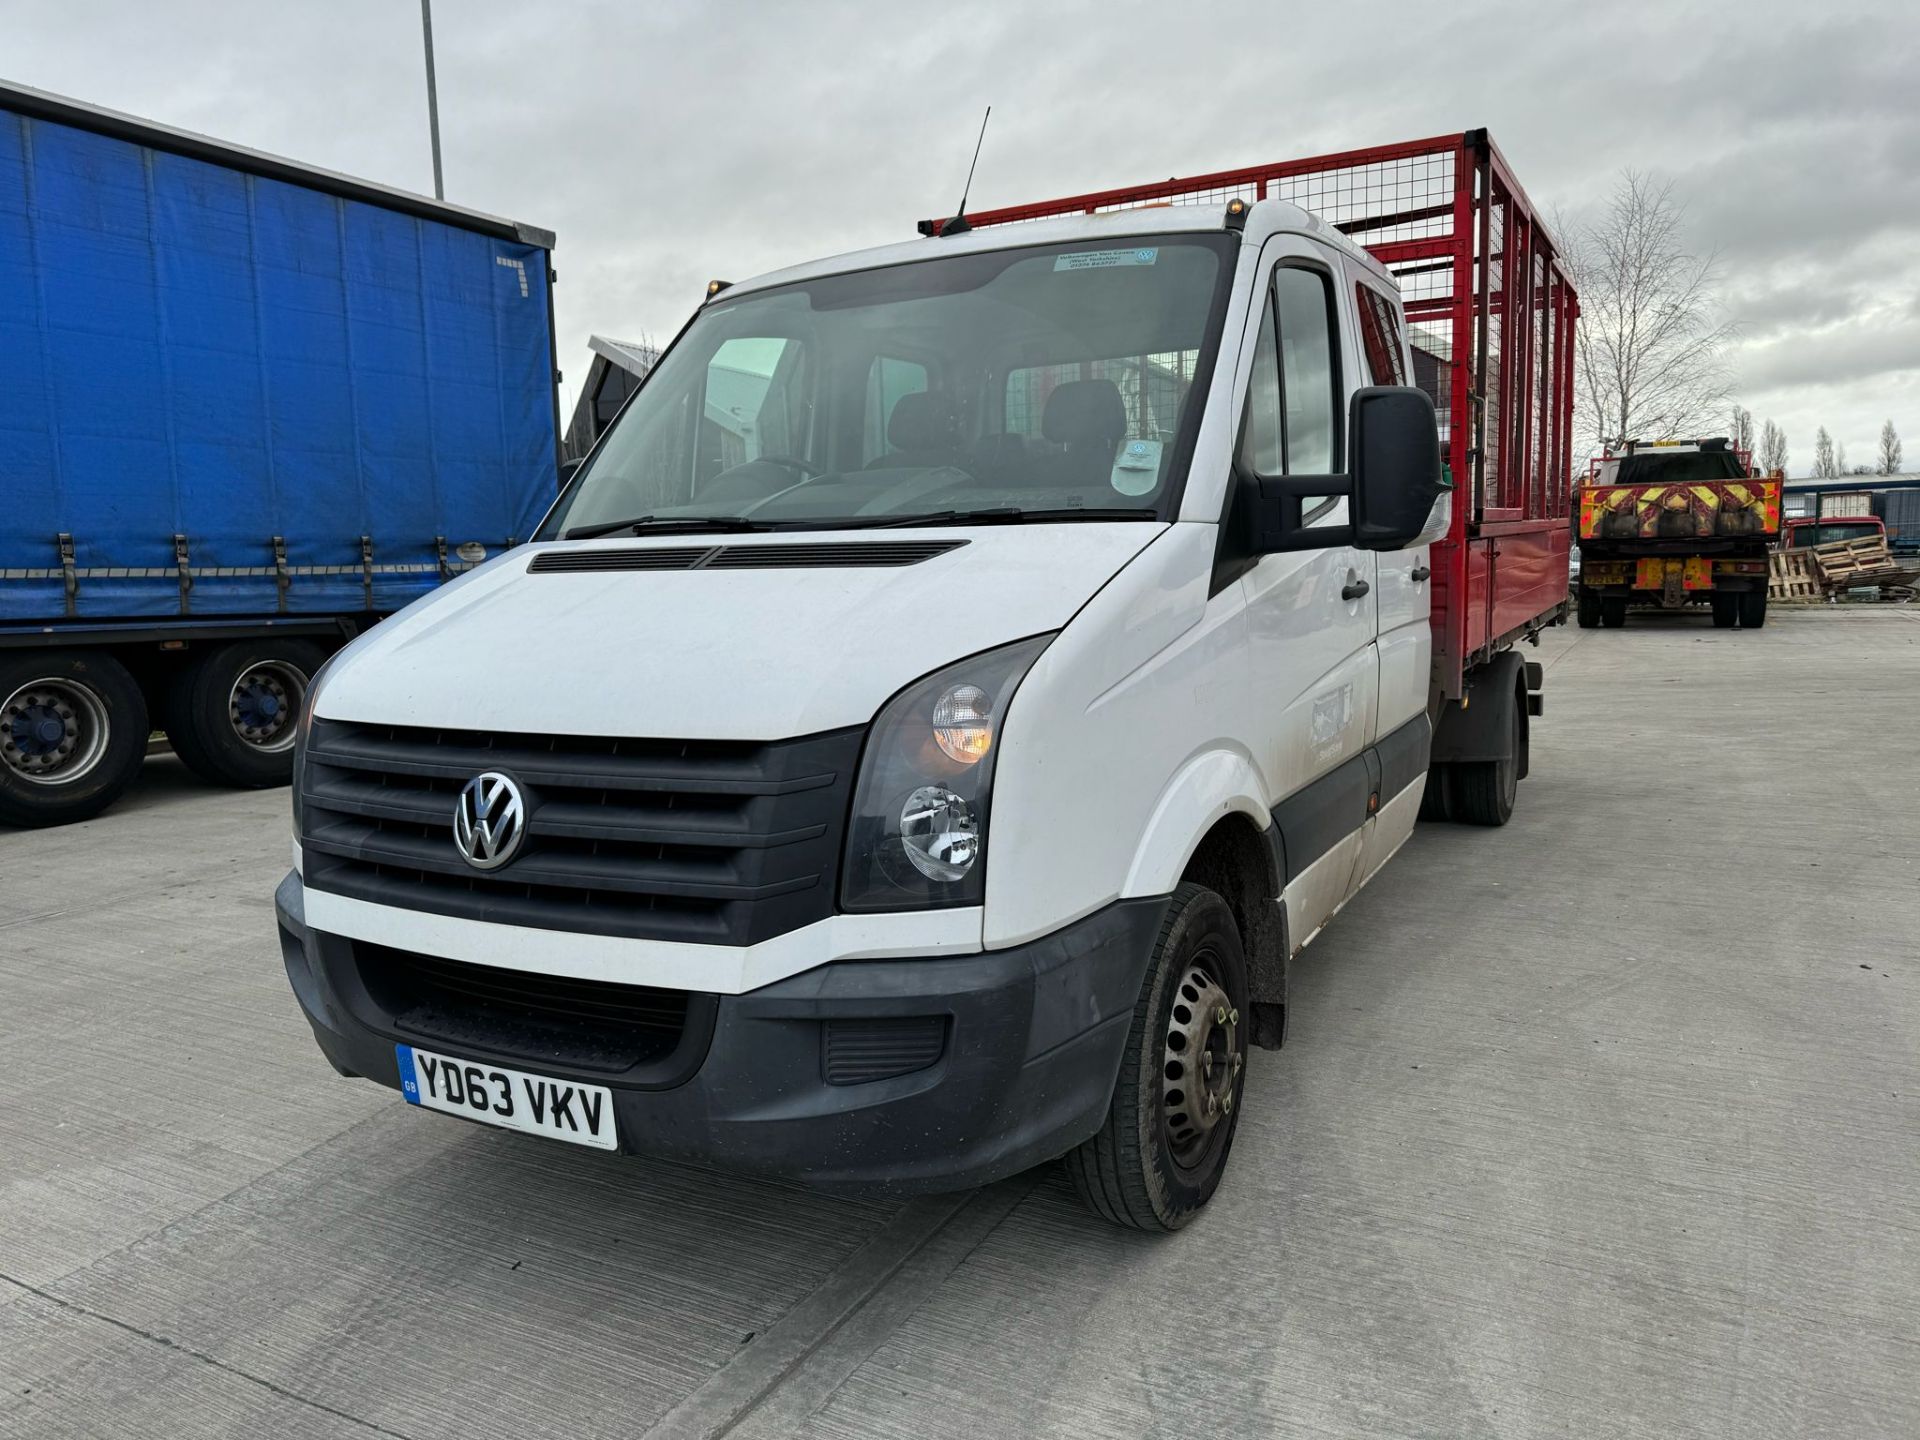 2013, VOLKSWAGEN Crafter CR50 Startline TDI, HGV Caged Tipper Van (Ex-Council Owned & Maintained) - Bild 2 aus 42